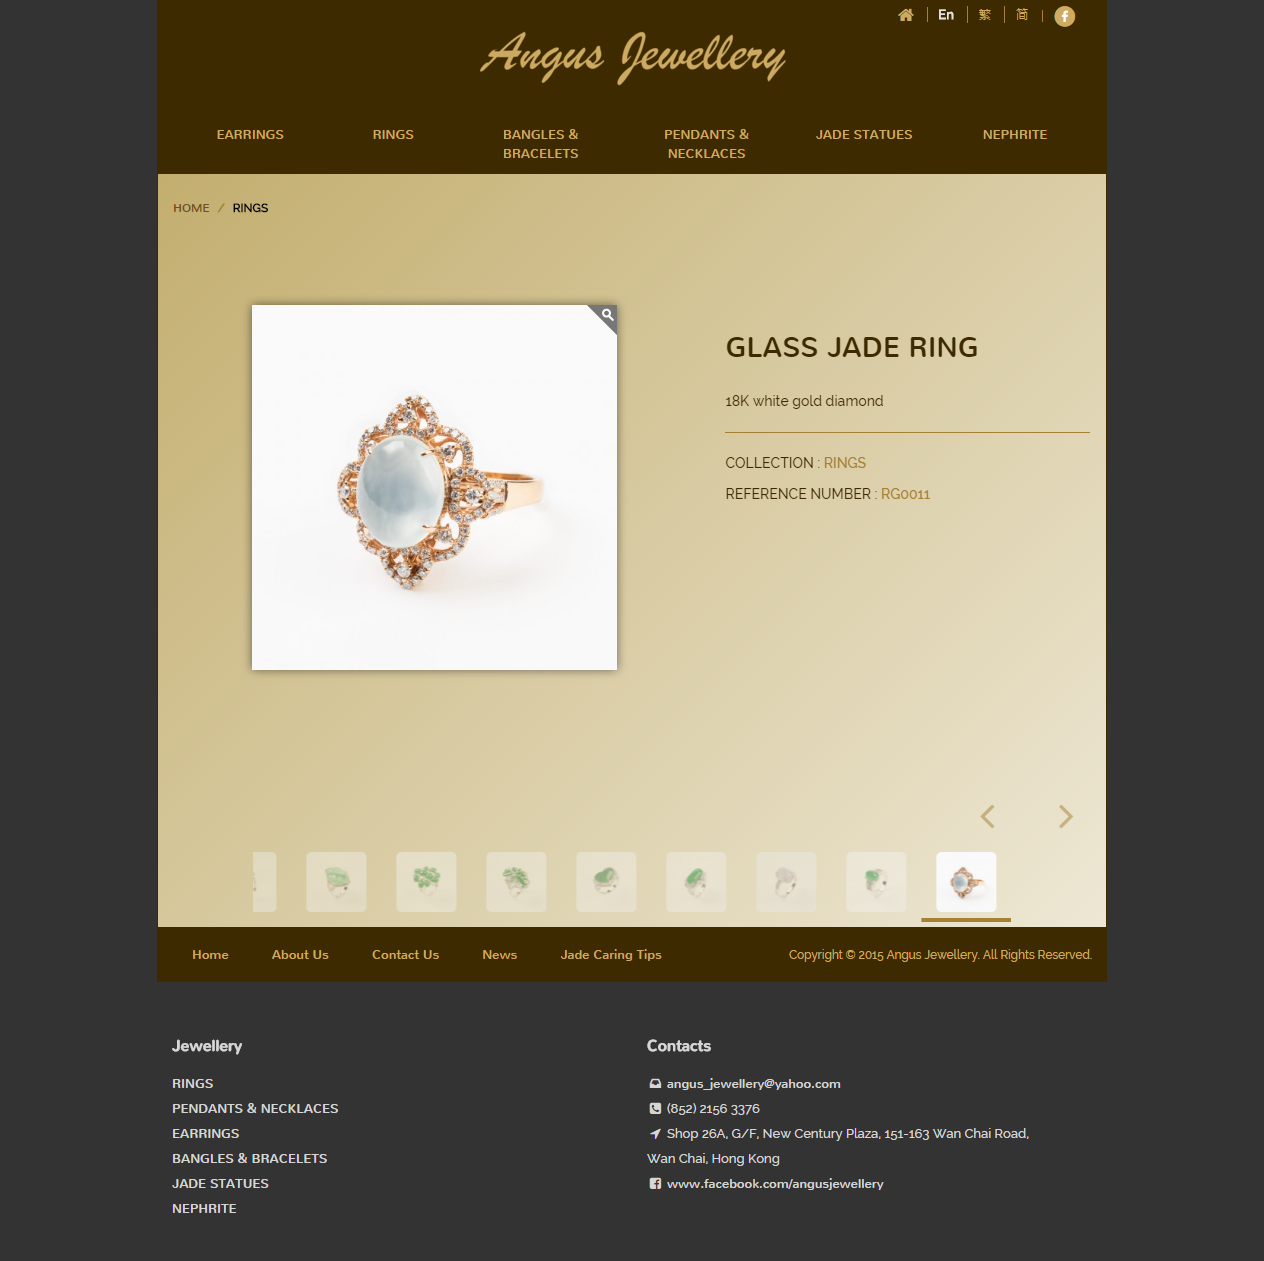 Angus Jewellery Website | Product Page - Rings